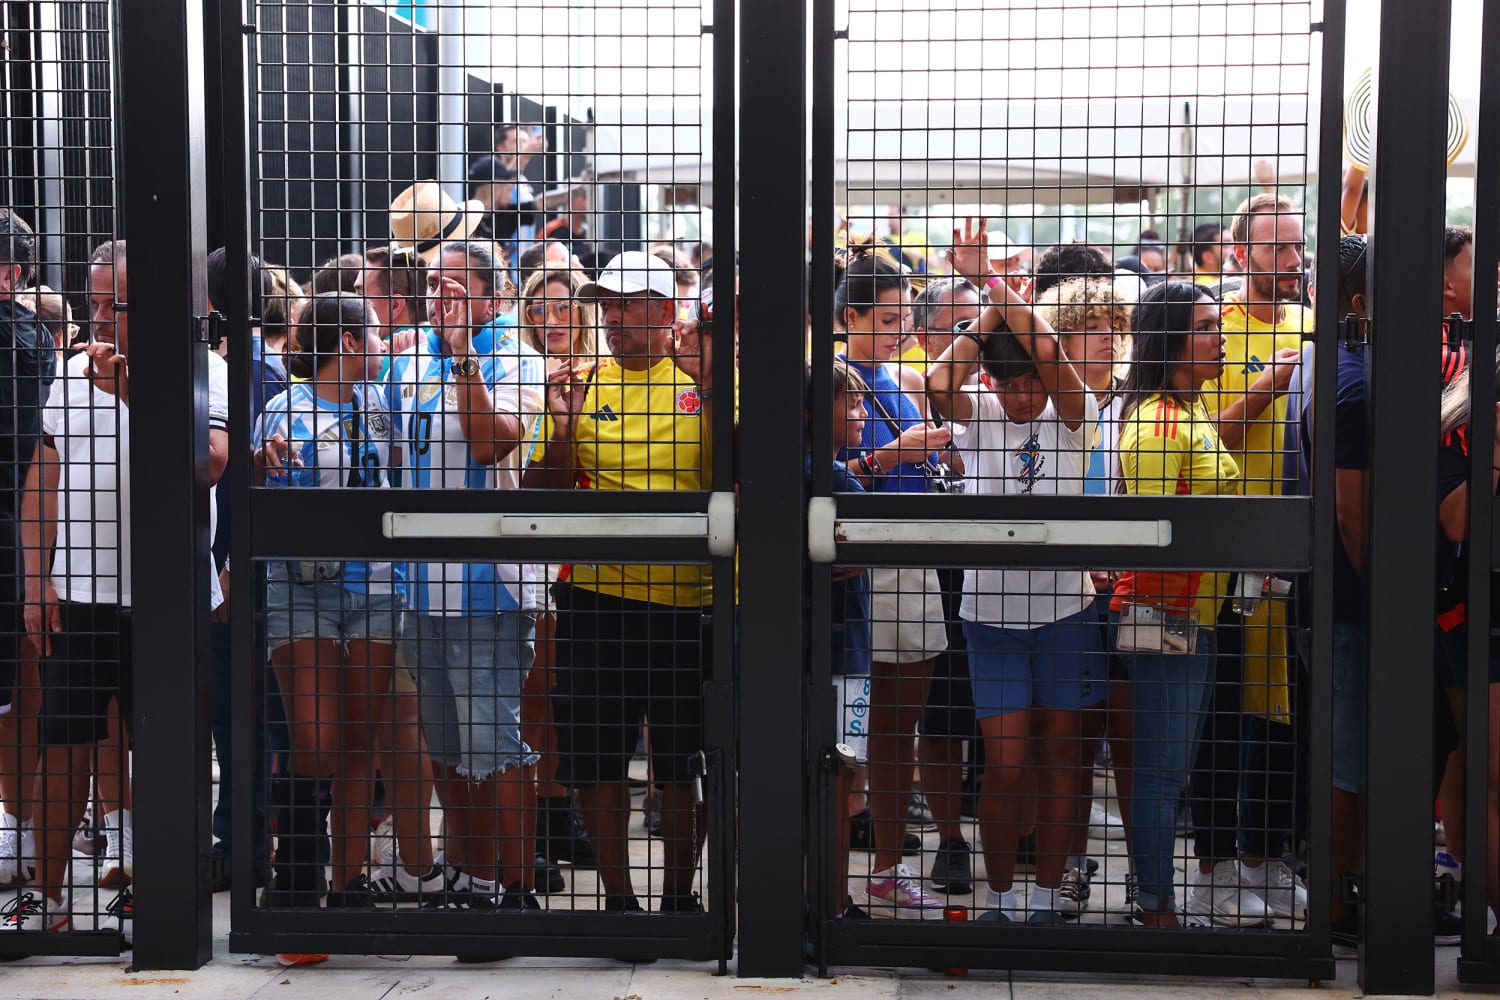 Riots at Copa America gates in Miami prevent ticketed fans from entering match